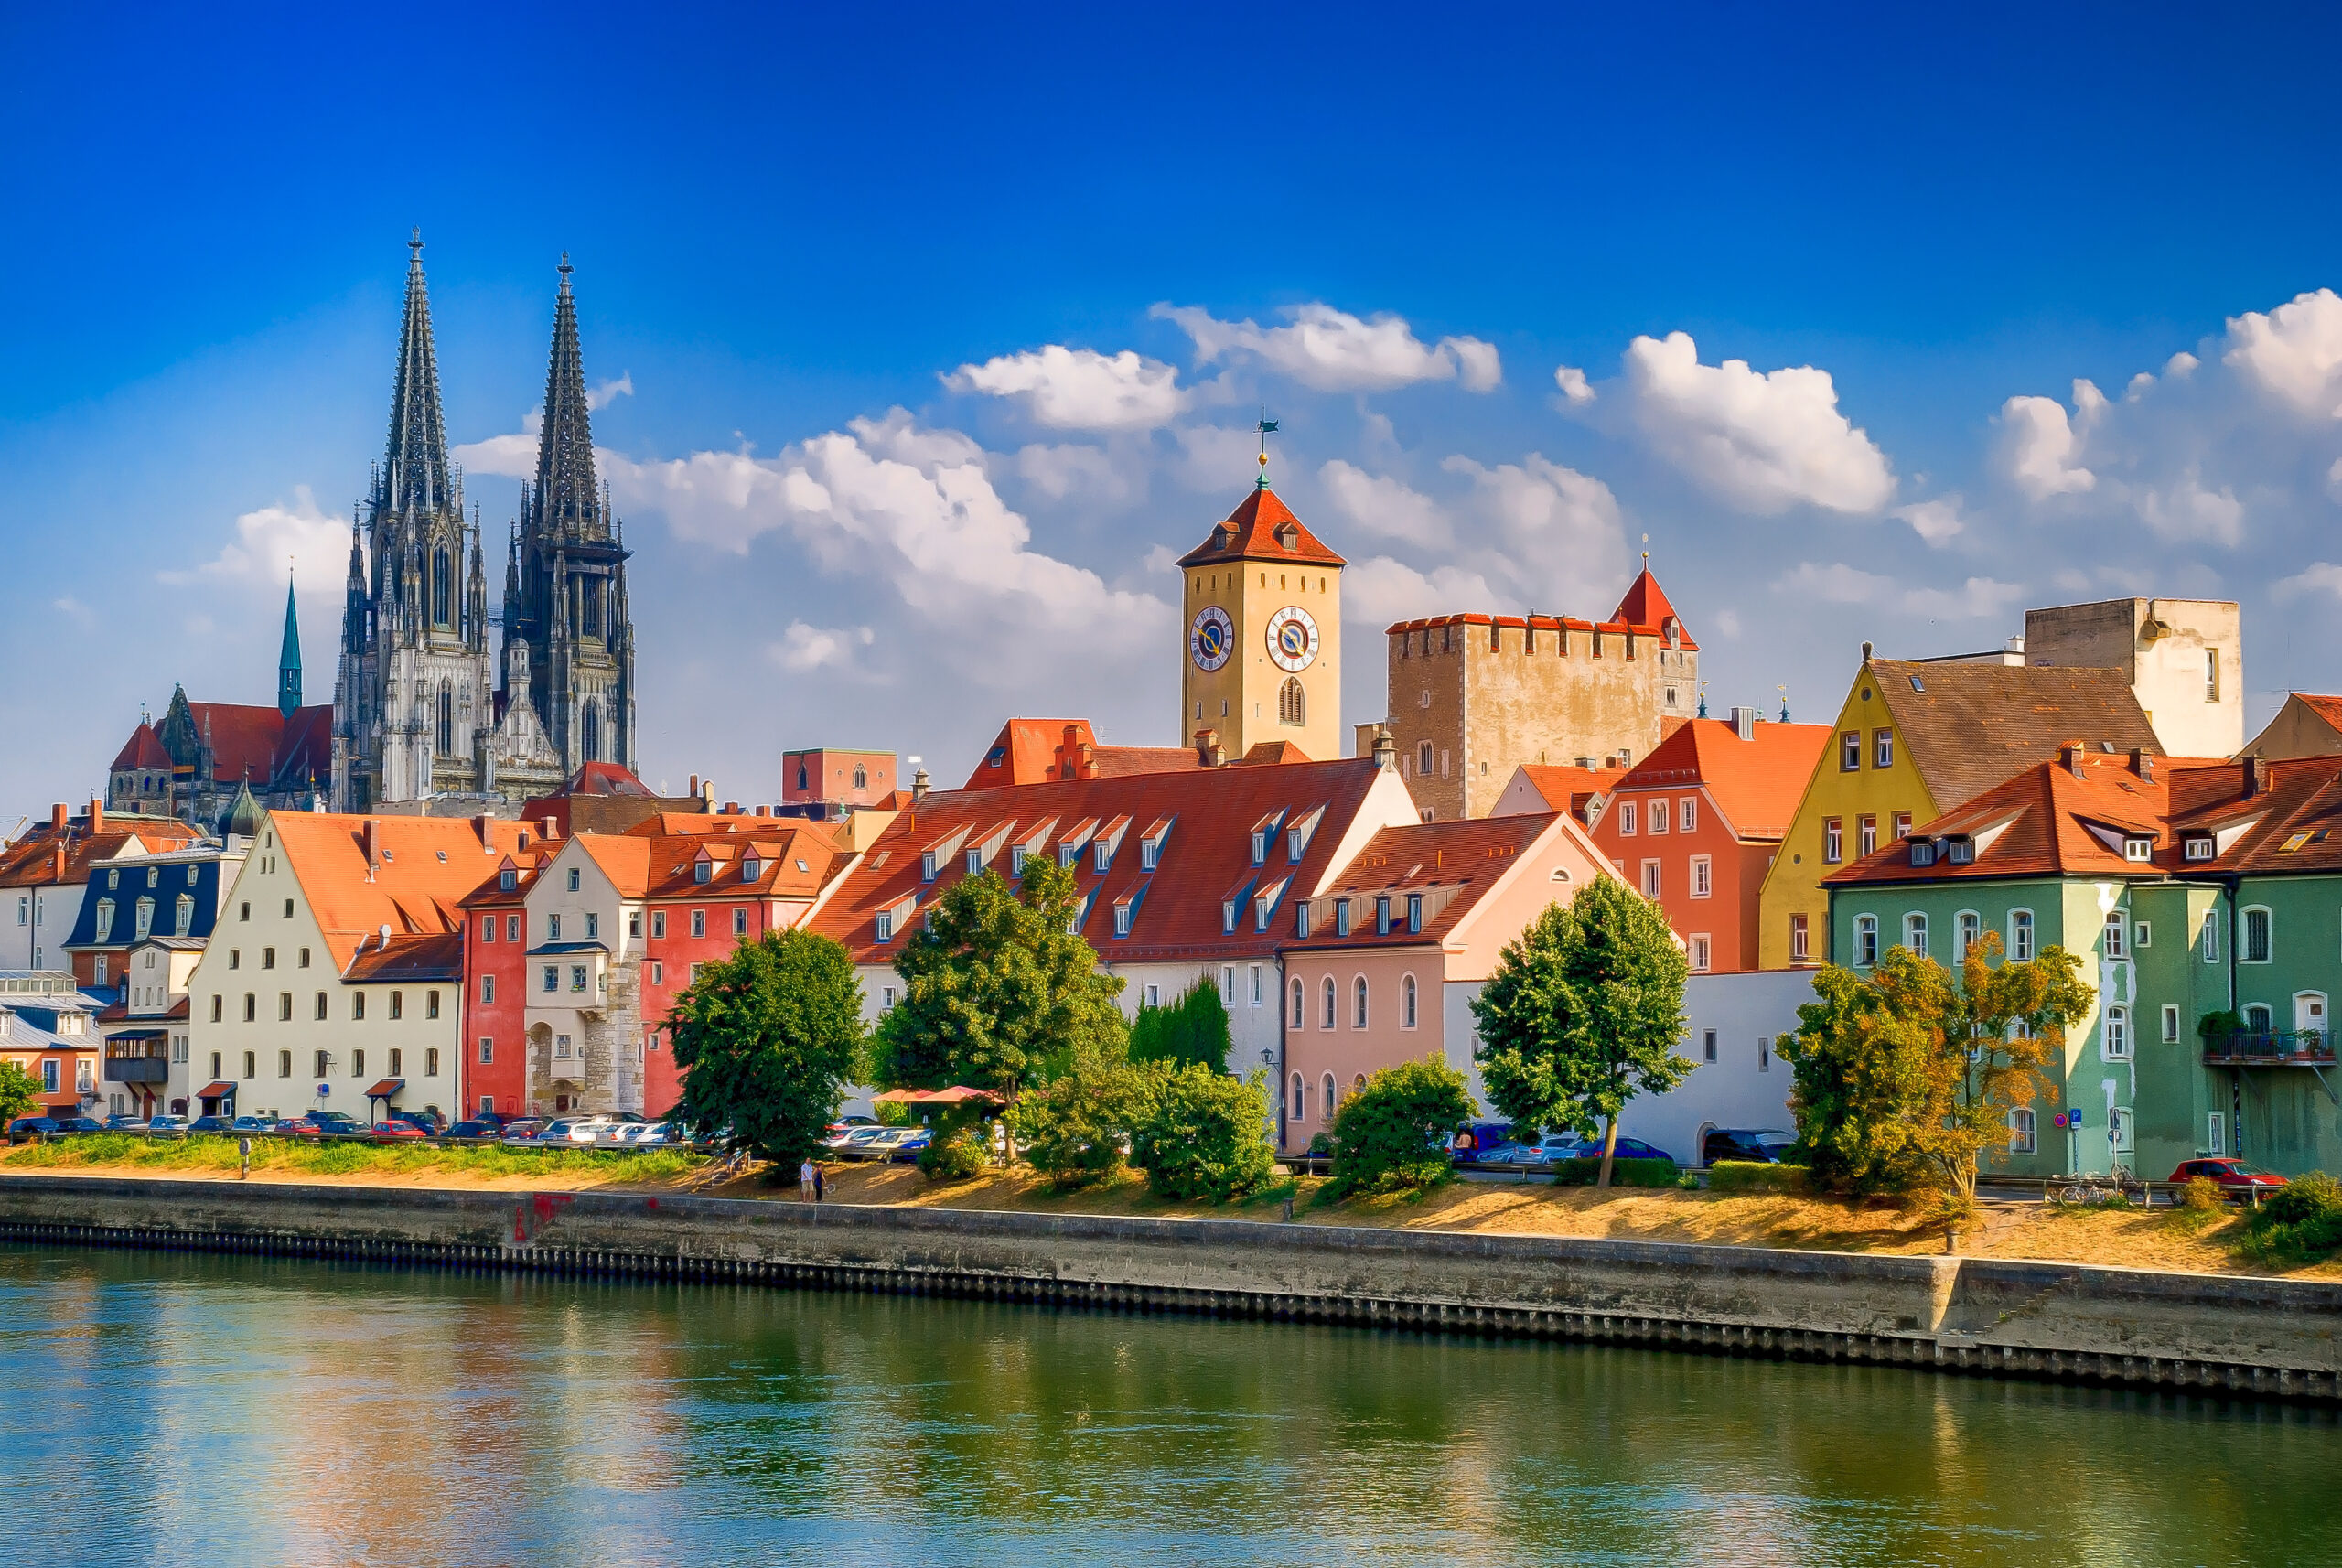 Regensburg with the Danube, Cathedral and Stone Bridge, Upper Palatinate, Bay.